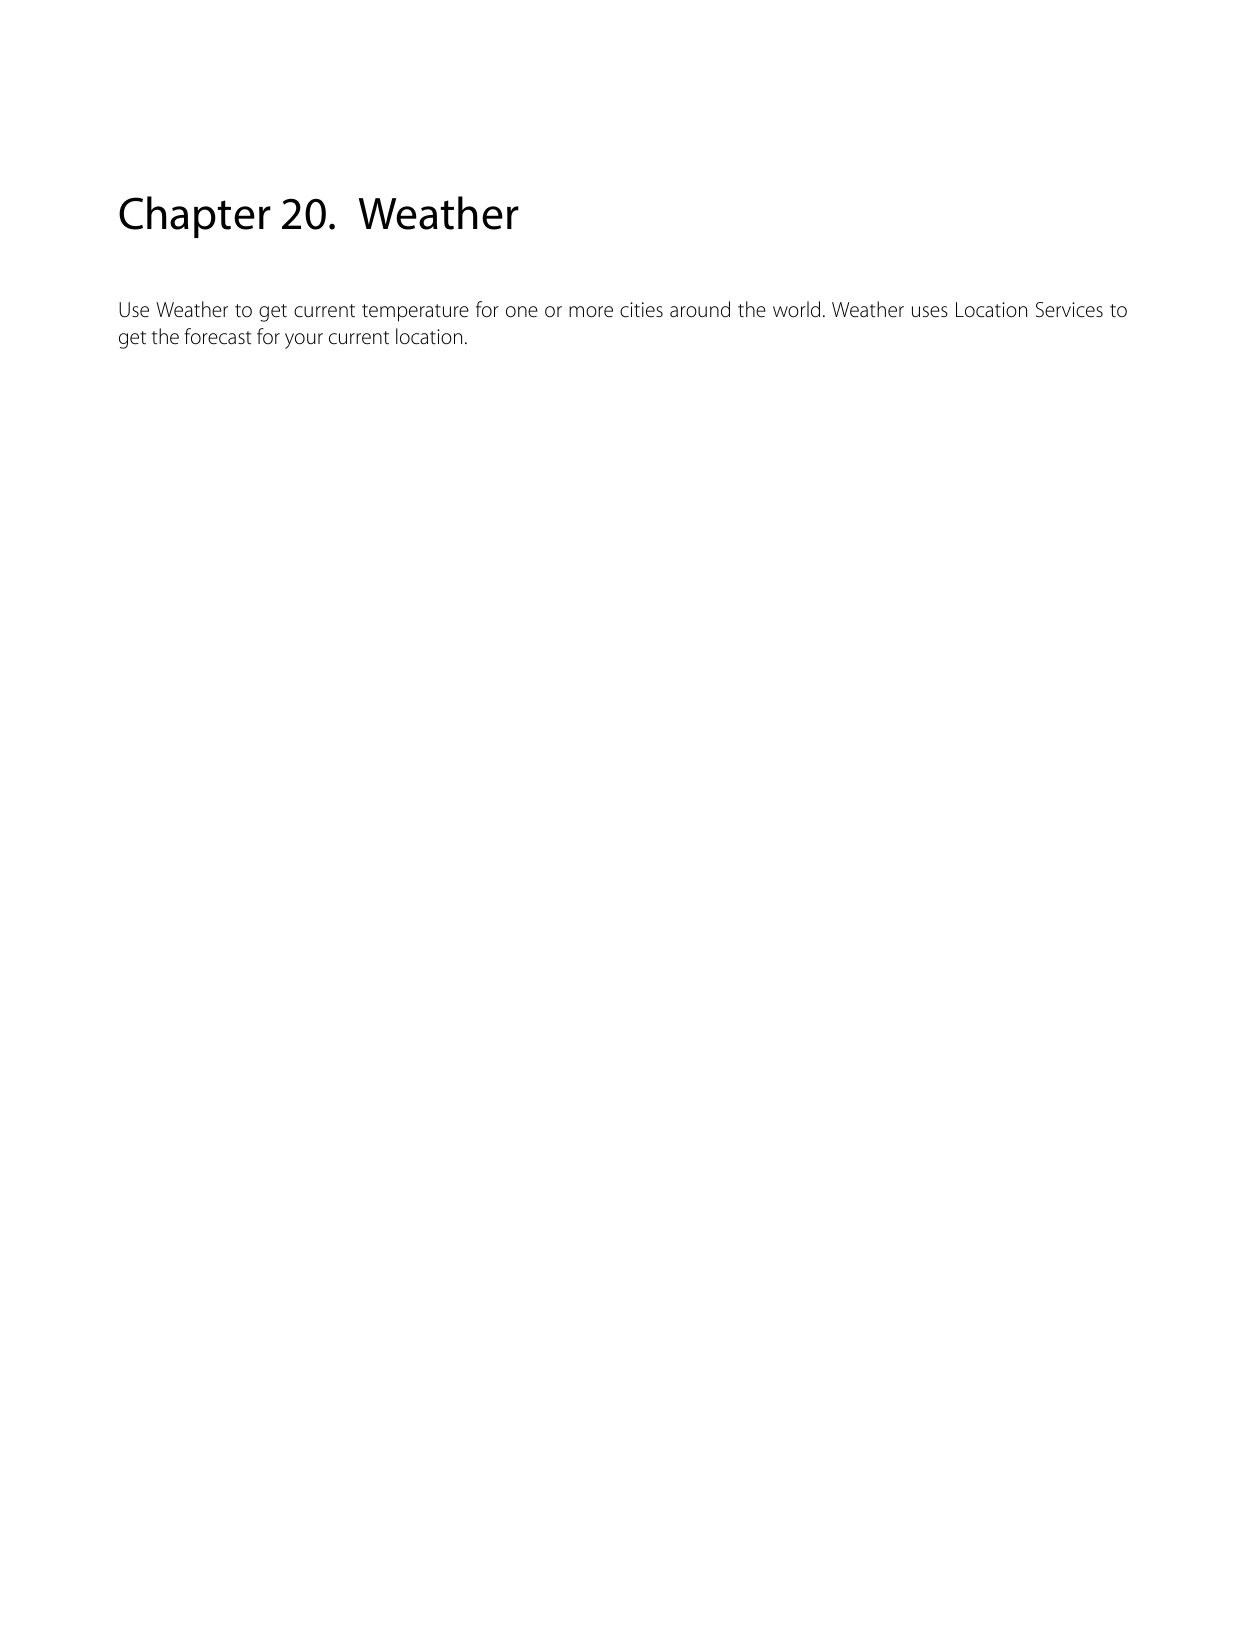  Chapter 20. Weather Use Weather to get current temperature for one or more cities around the world. Weather uses Location Services to get the forecast for your current location.  